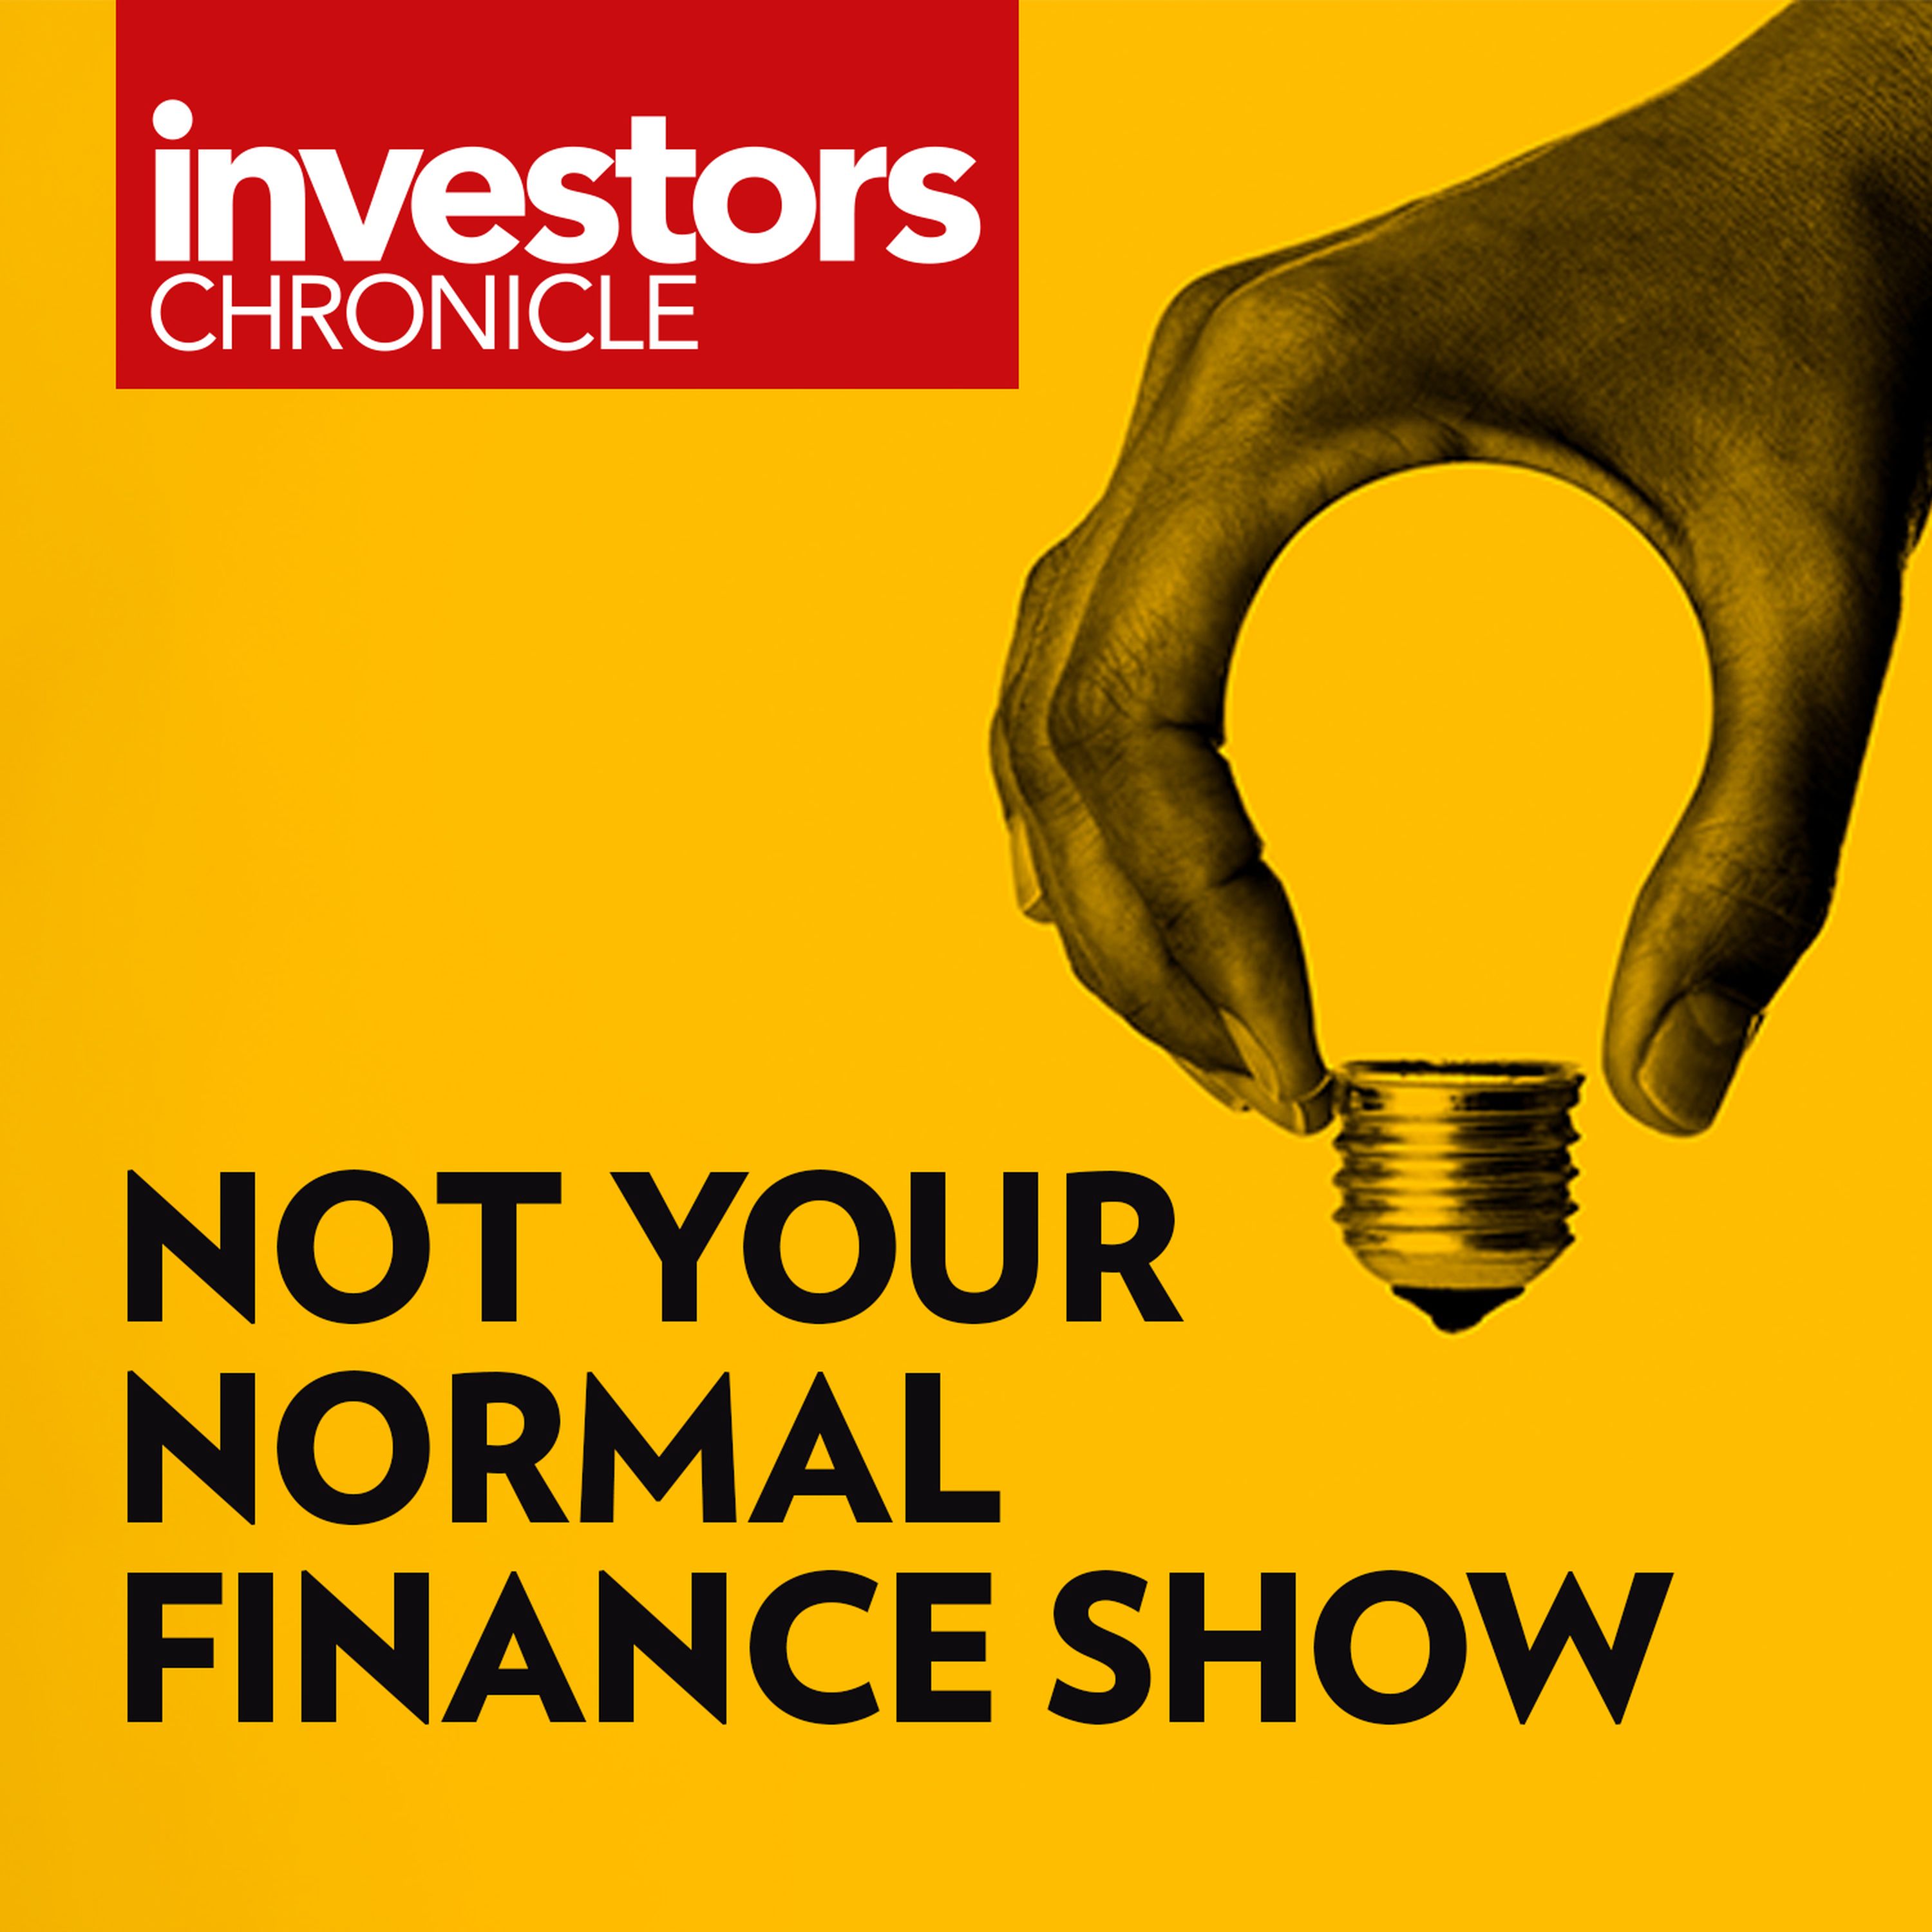 Not your normal finance show: Motoring ahead